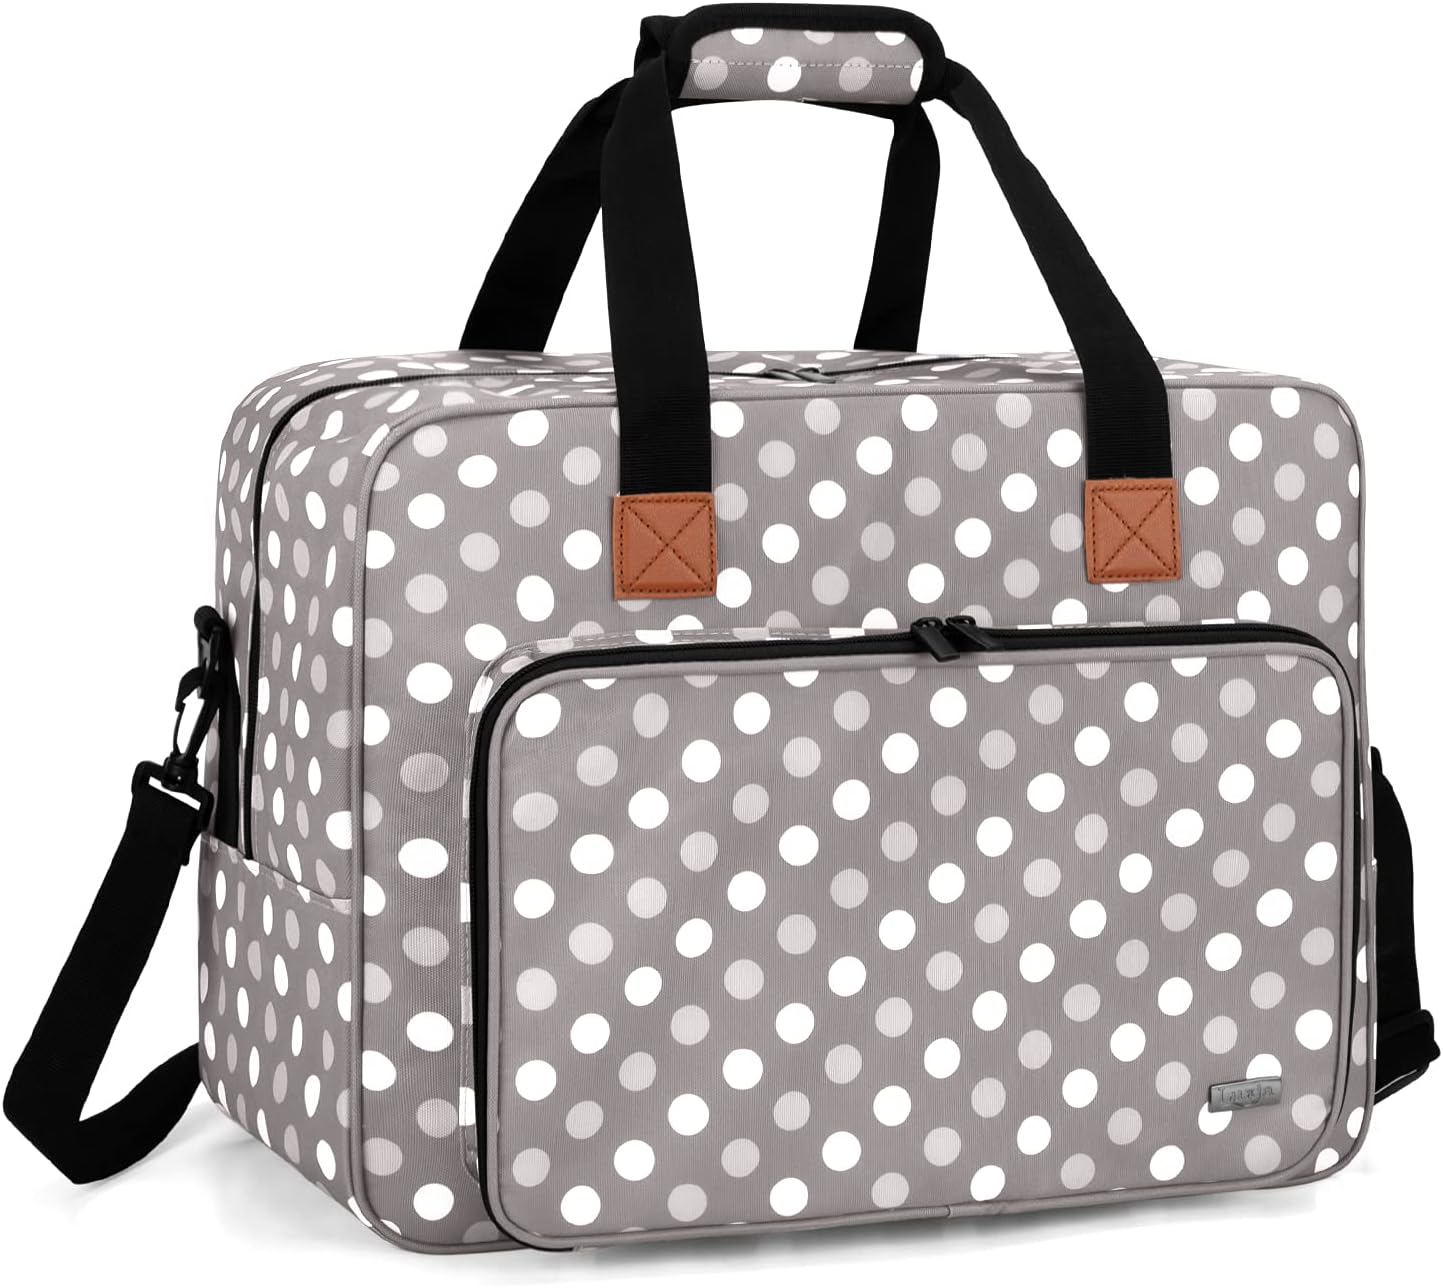 LUXJA Sewing Machine Bag, Portable Tote Bag Compatible with Most Singer, Brother Sewing Machines and Extra Sewing Accessories, Gray Dots